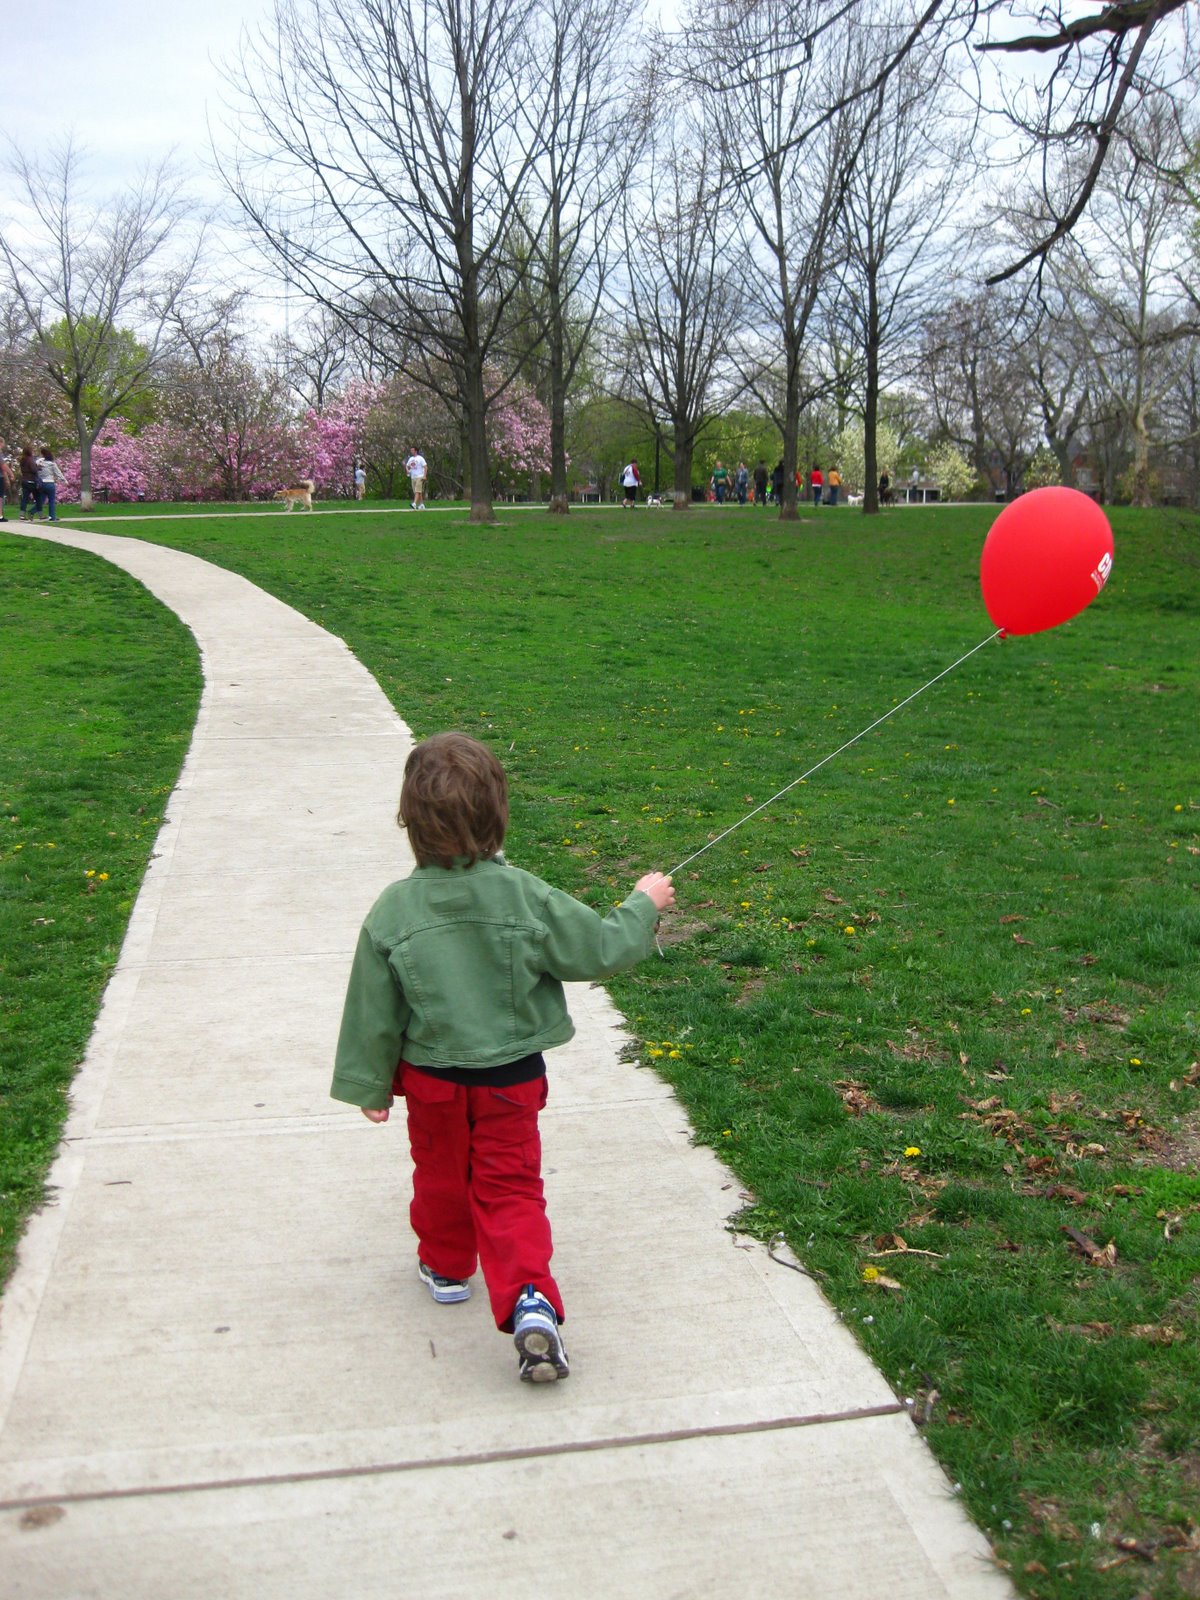 Walking with a balloon